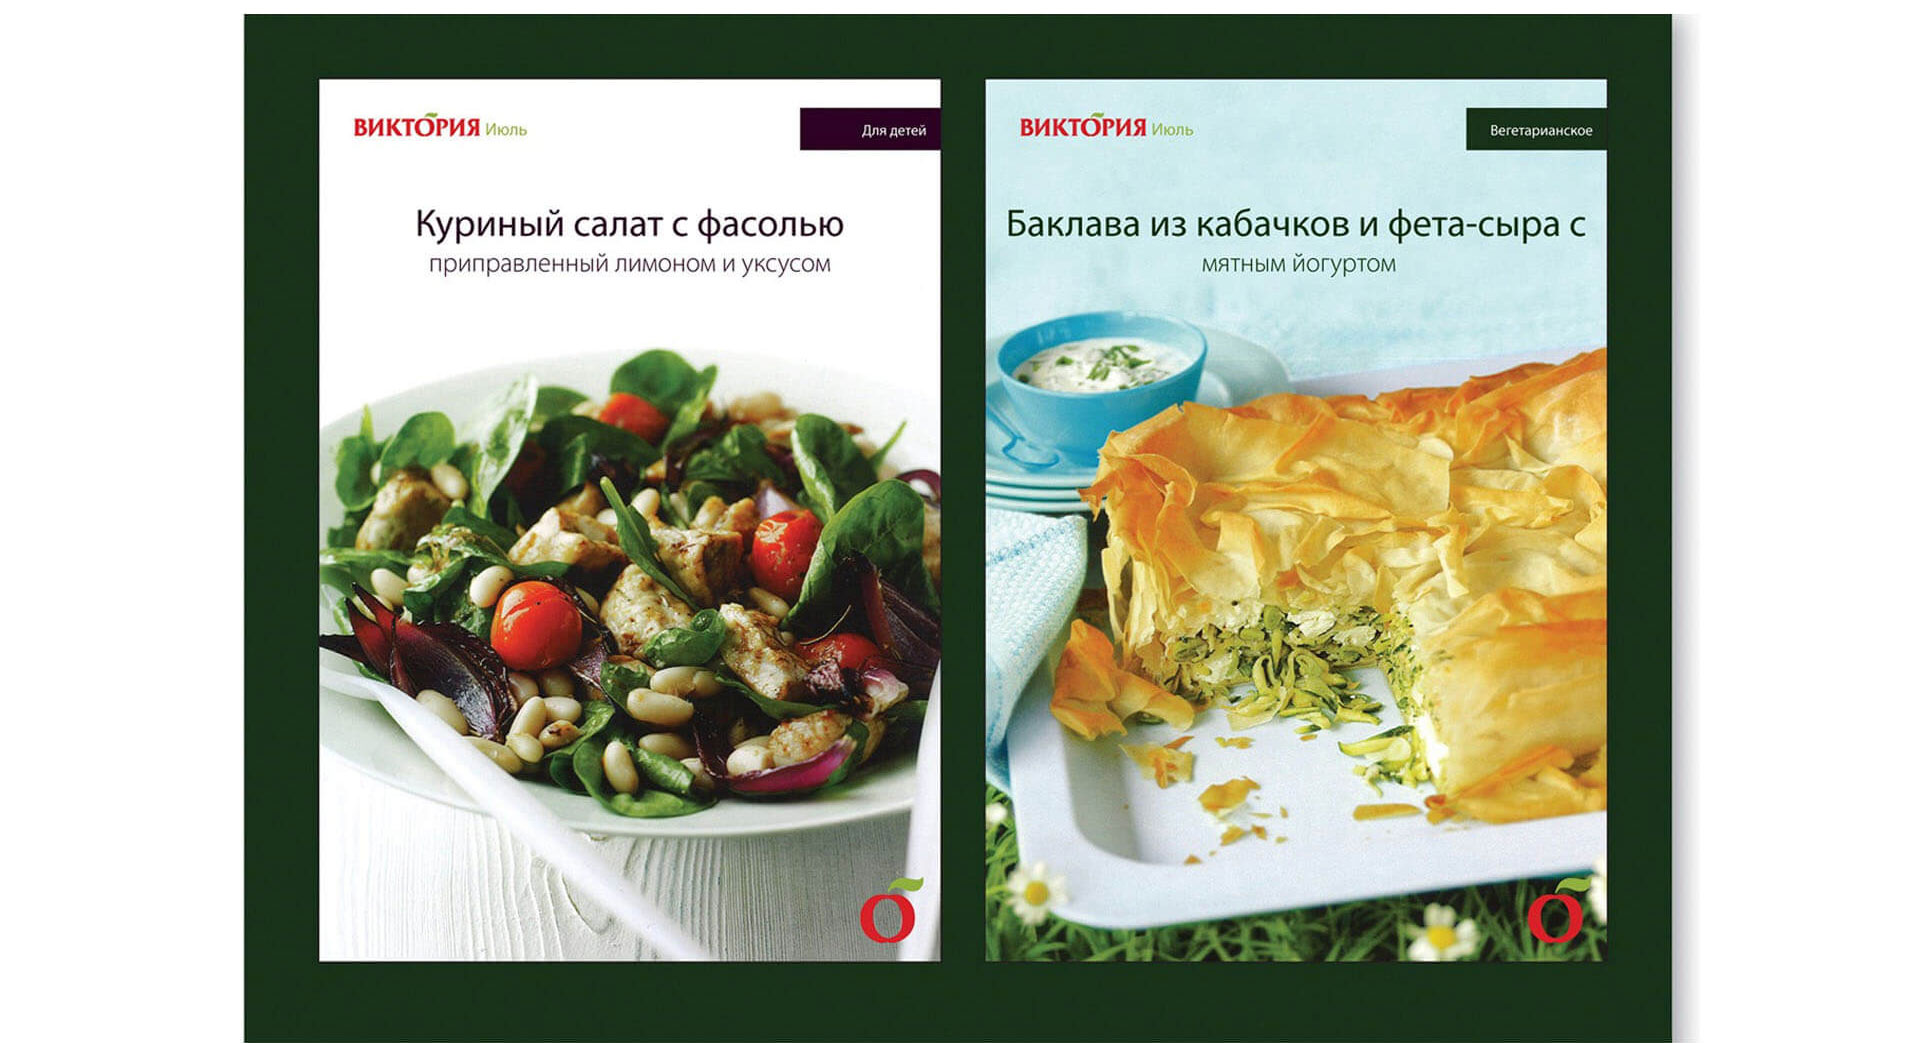 Victoria supermarkets Russia in-store brand communications and marketing material